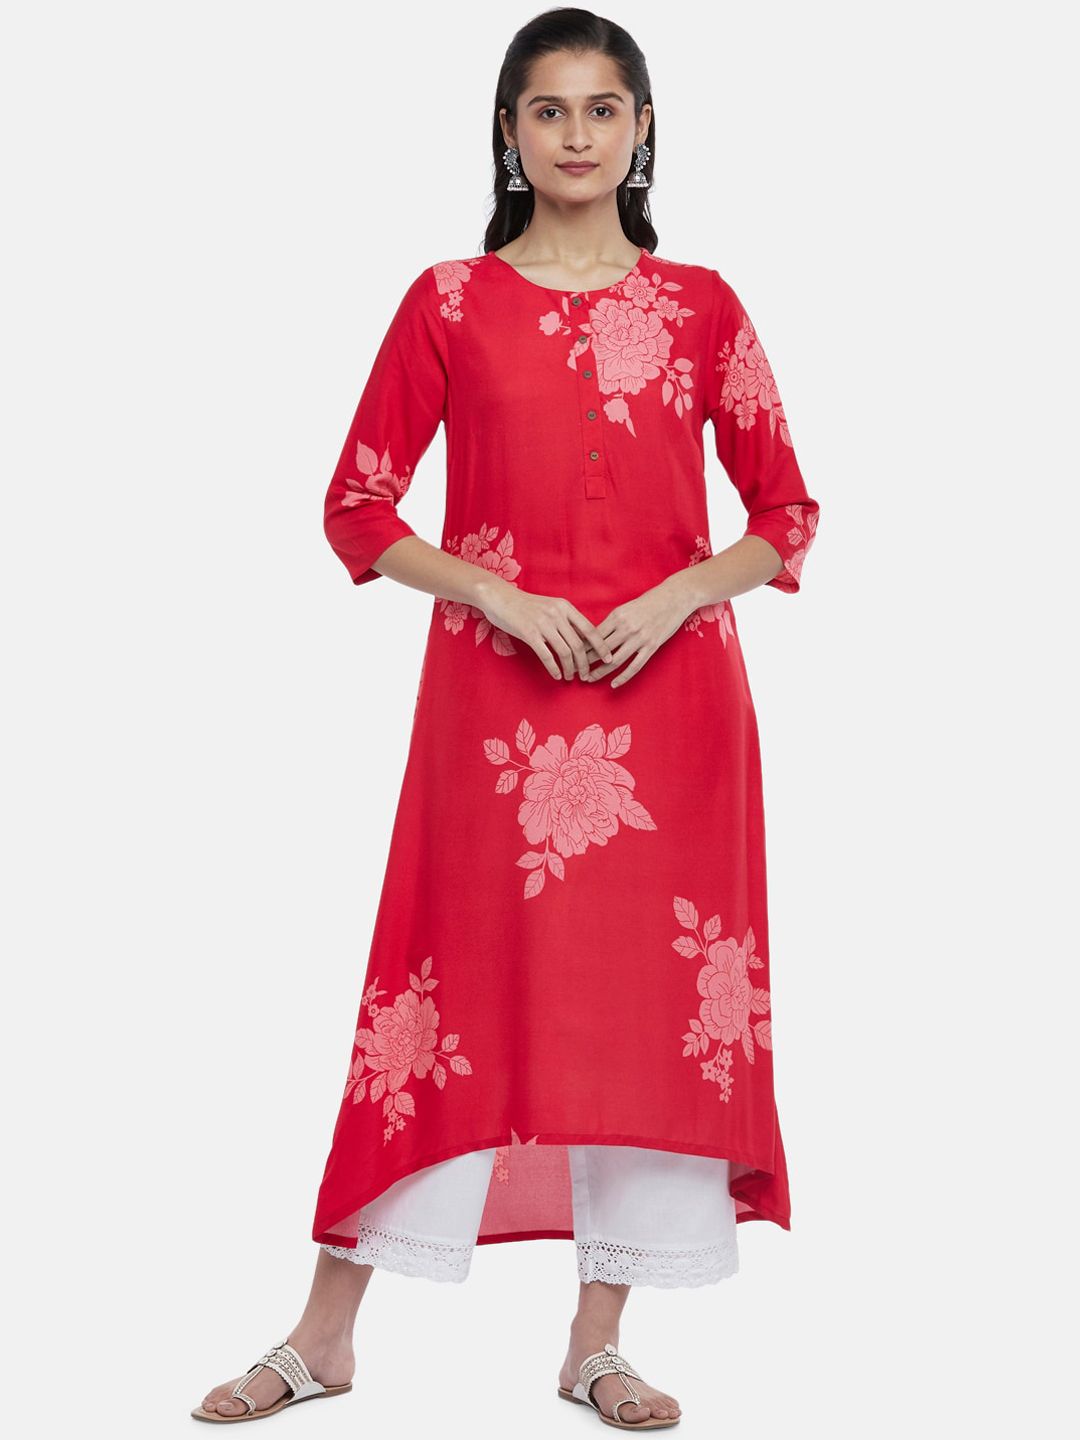 RANGMANCH BY PANTALOONS Women Red & White Floral Printed Thread Work A-Line Kurta Price in India